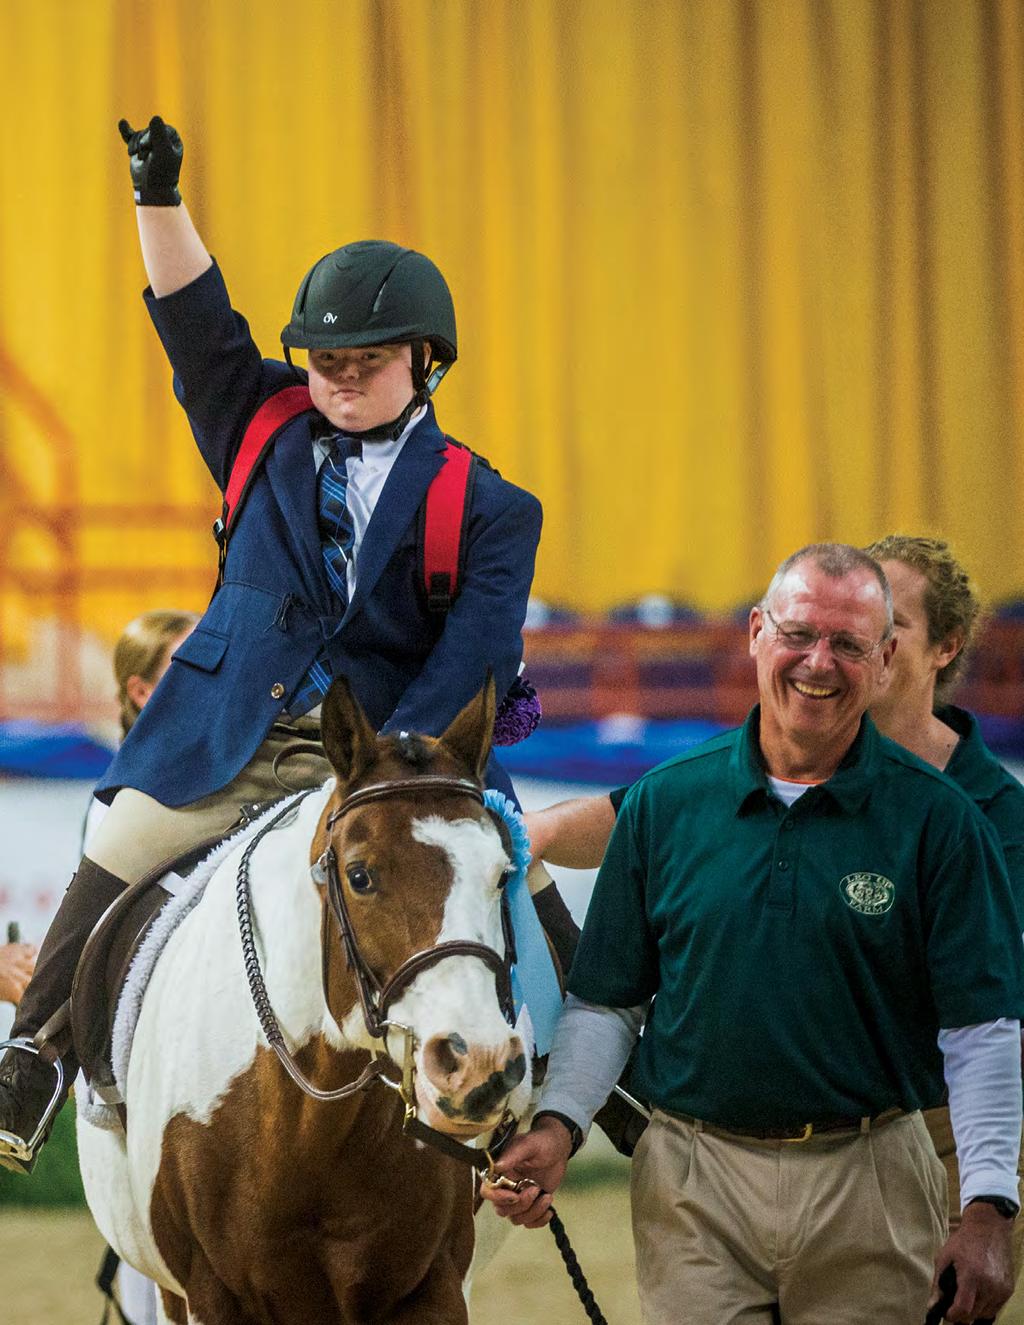 The Foundation The Pennsylvania National Horse Show supports a 501(c) 3 Foundation providing grants to therapeutic riding and horse rescue groups.